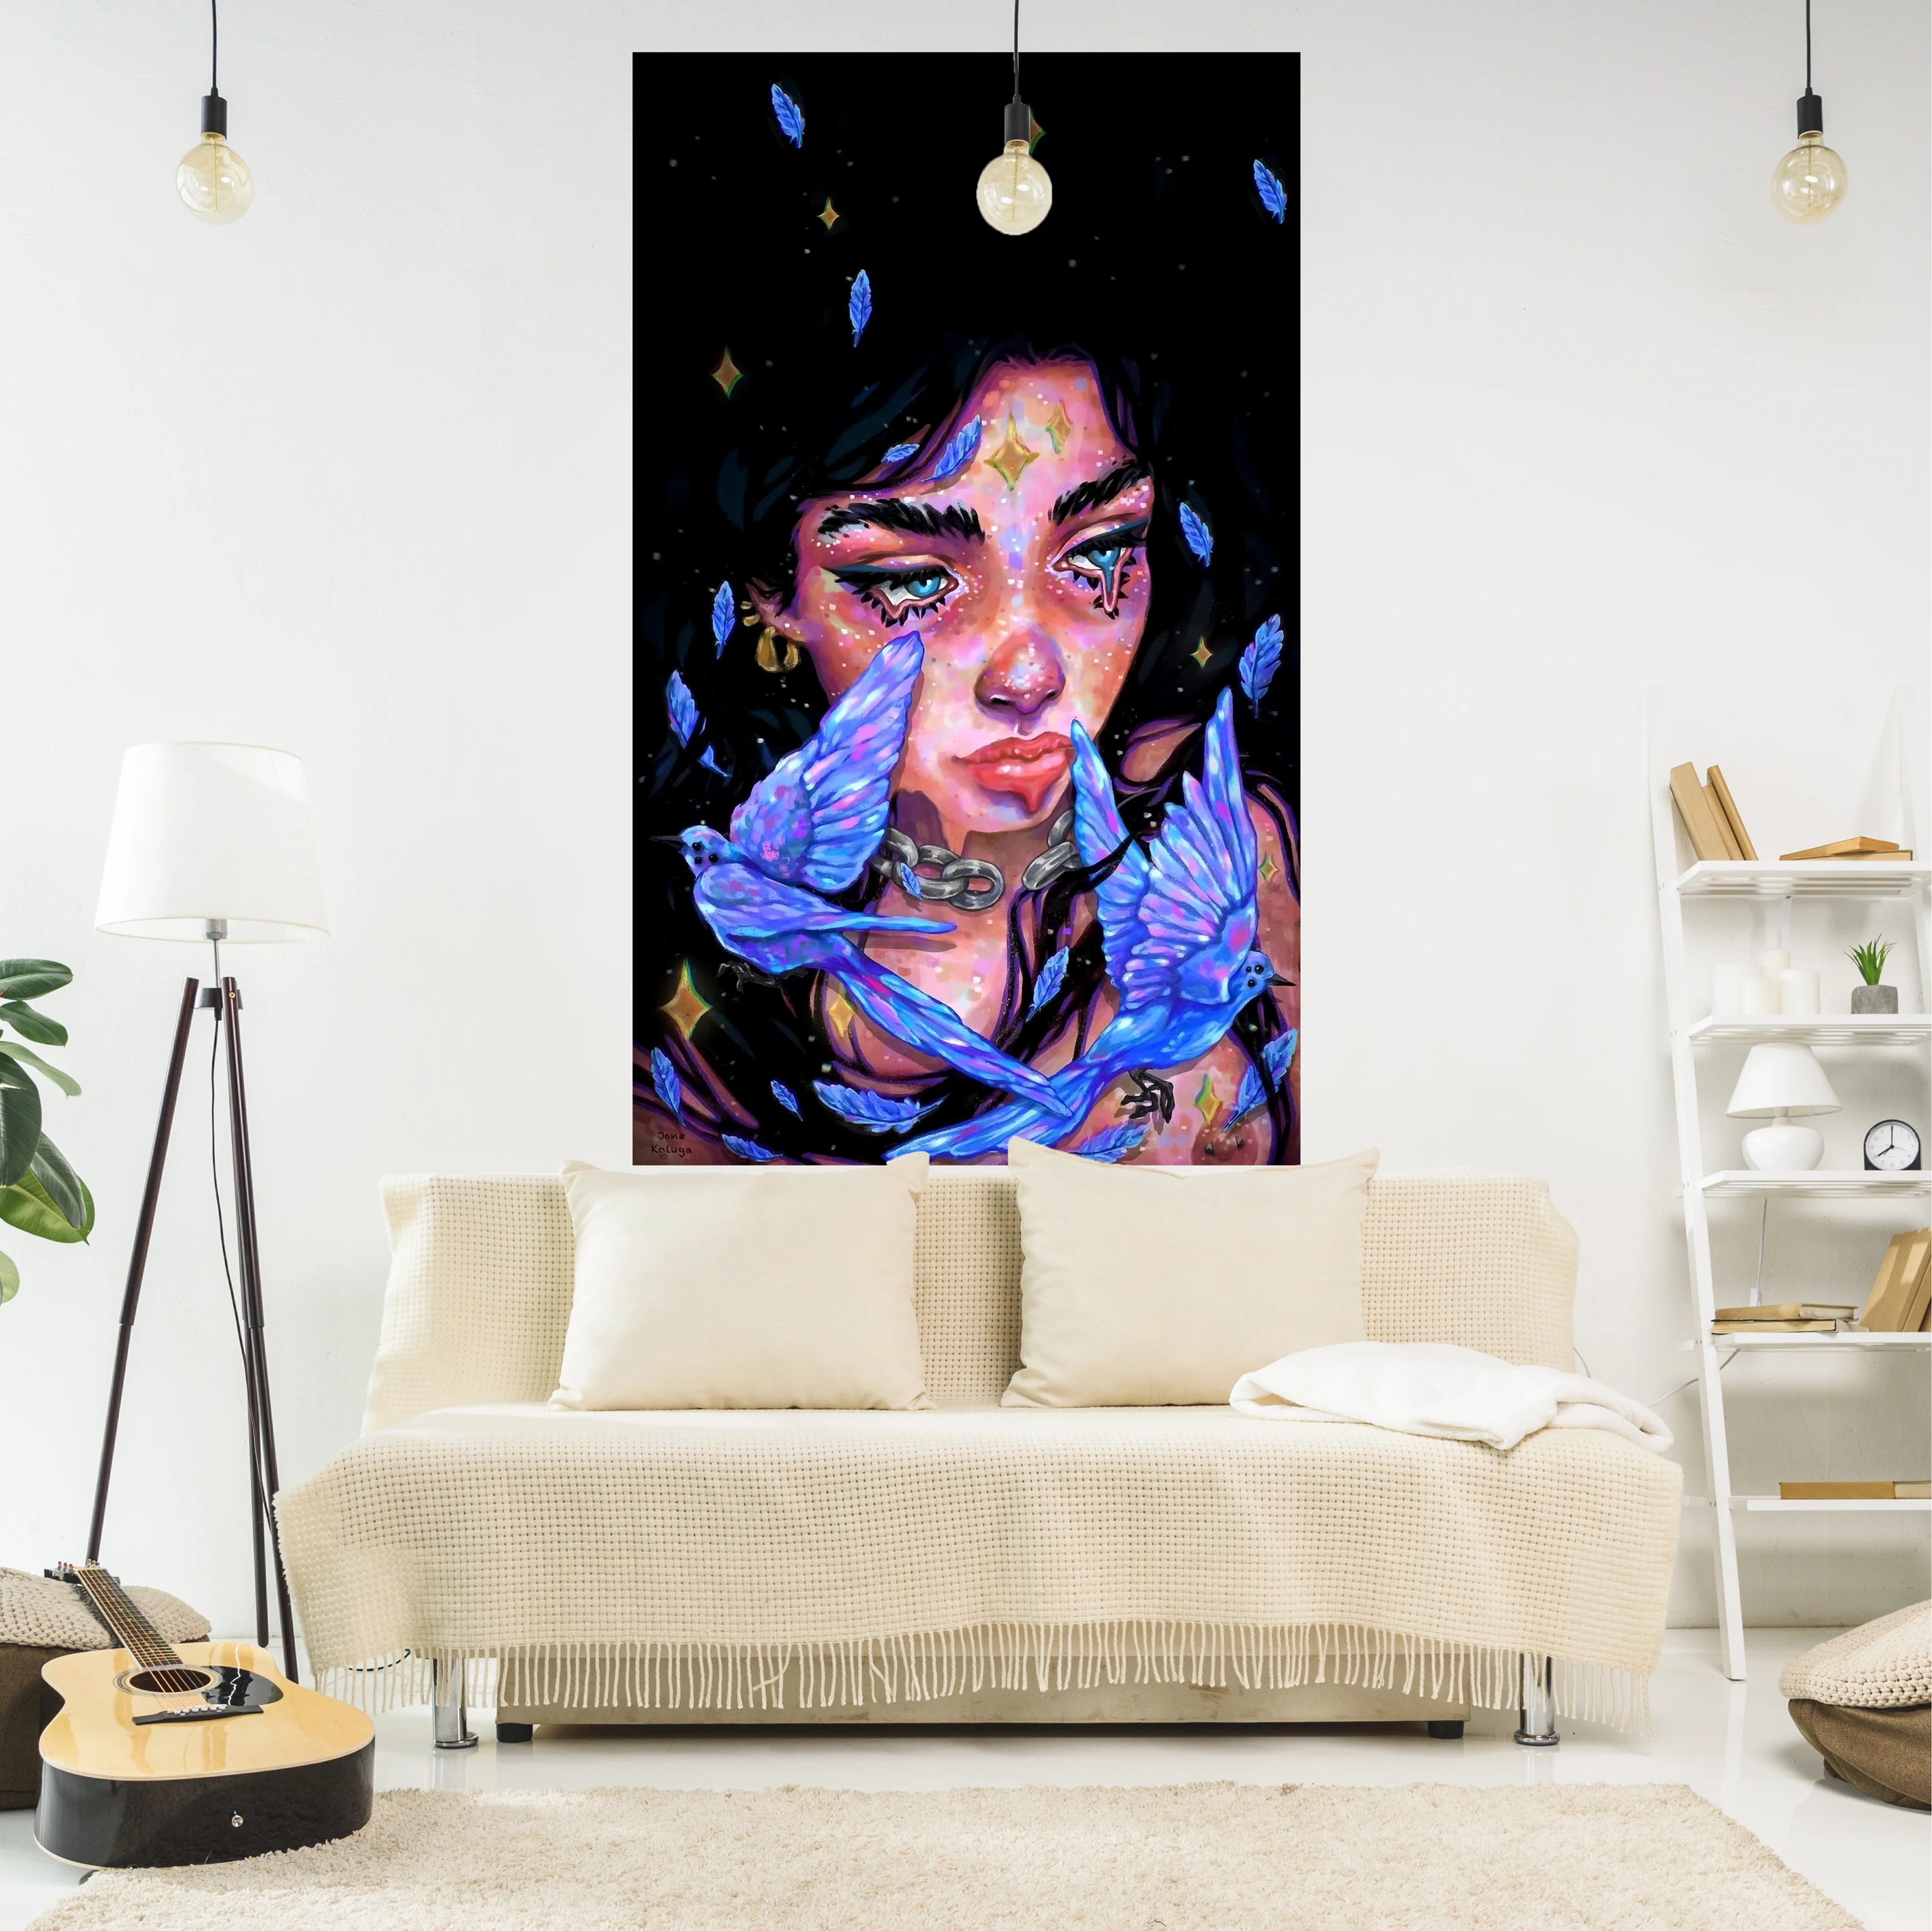 

XxDeco Kawaii Anime Girl Tapestry Creative Painting Printed Hippie Wall Hanging Carpets Bedroom Or Home Decoration Sofa Blanket